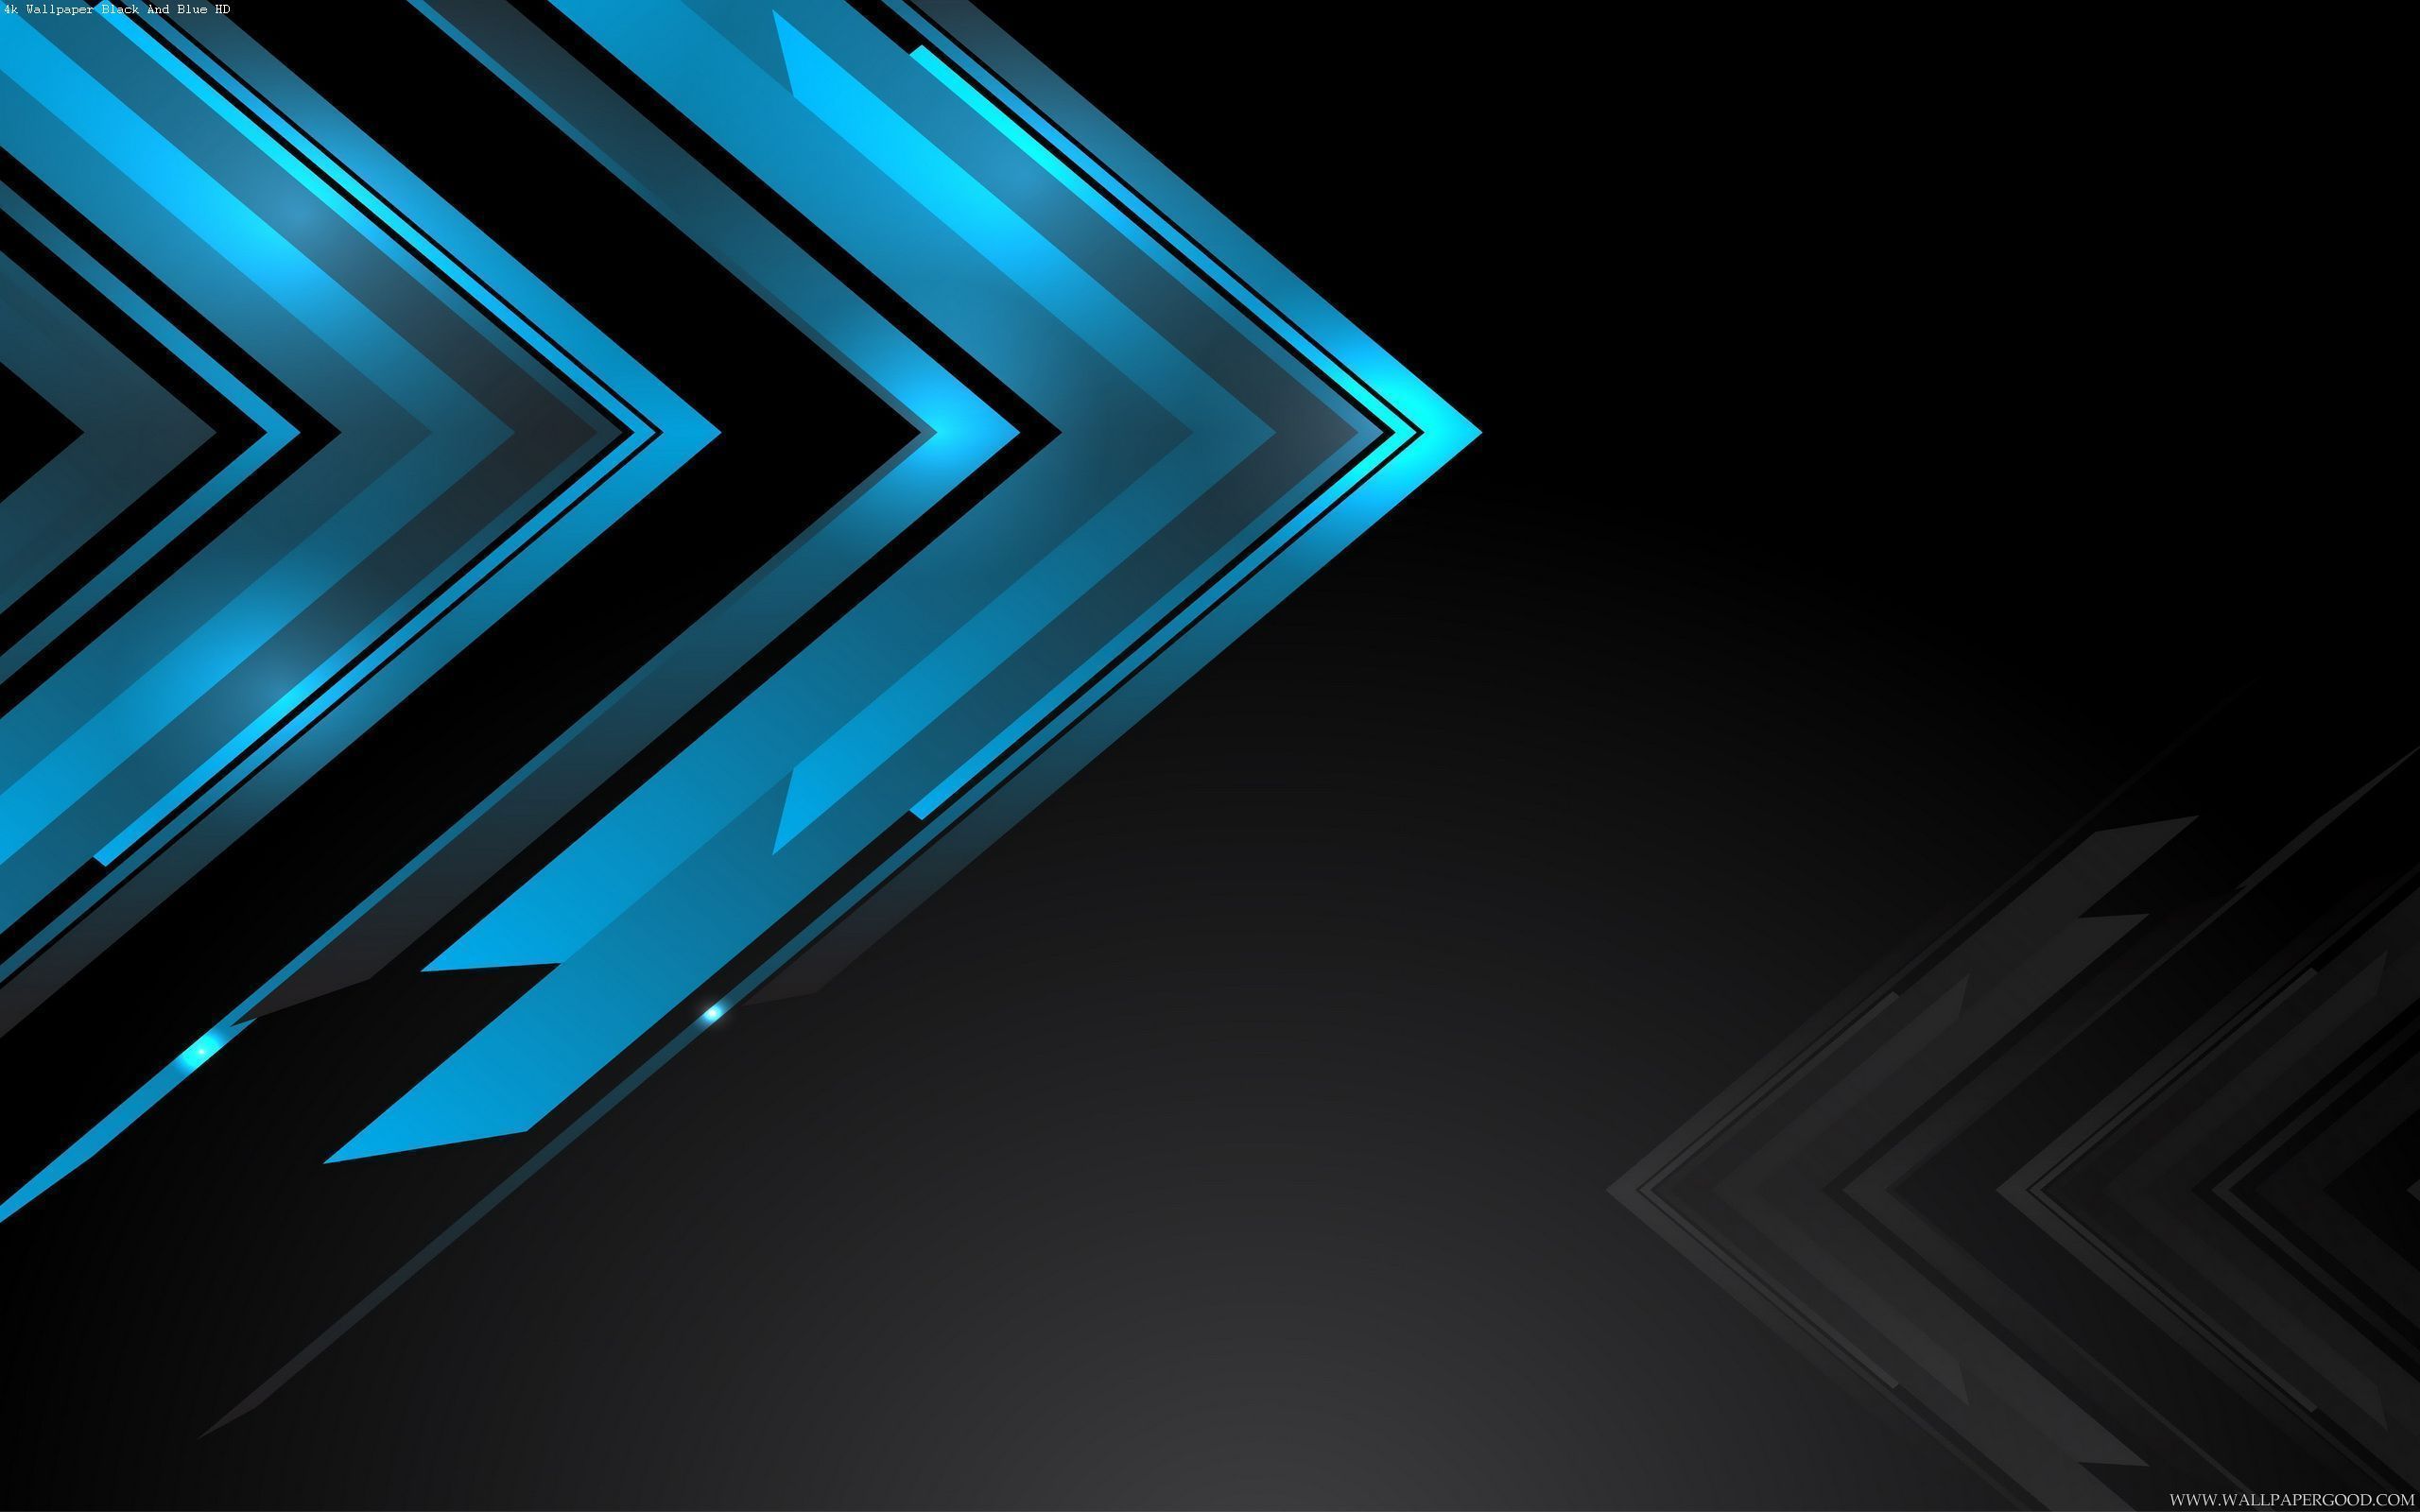 4k Wallpaper Black And Blue HD. Black and blue wallpaper, Light in the dark, Blue wallpaper